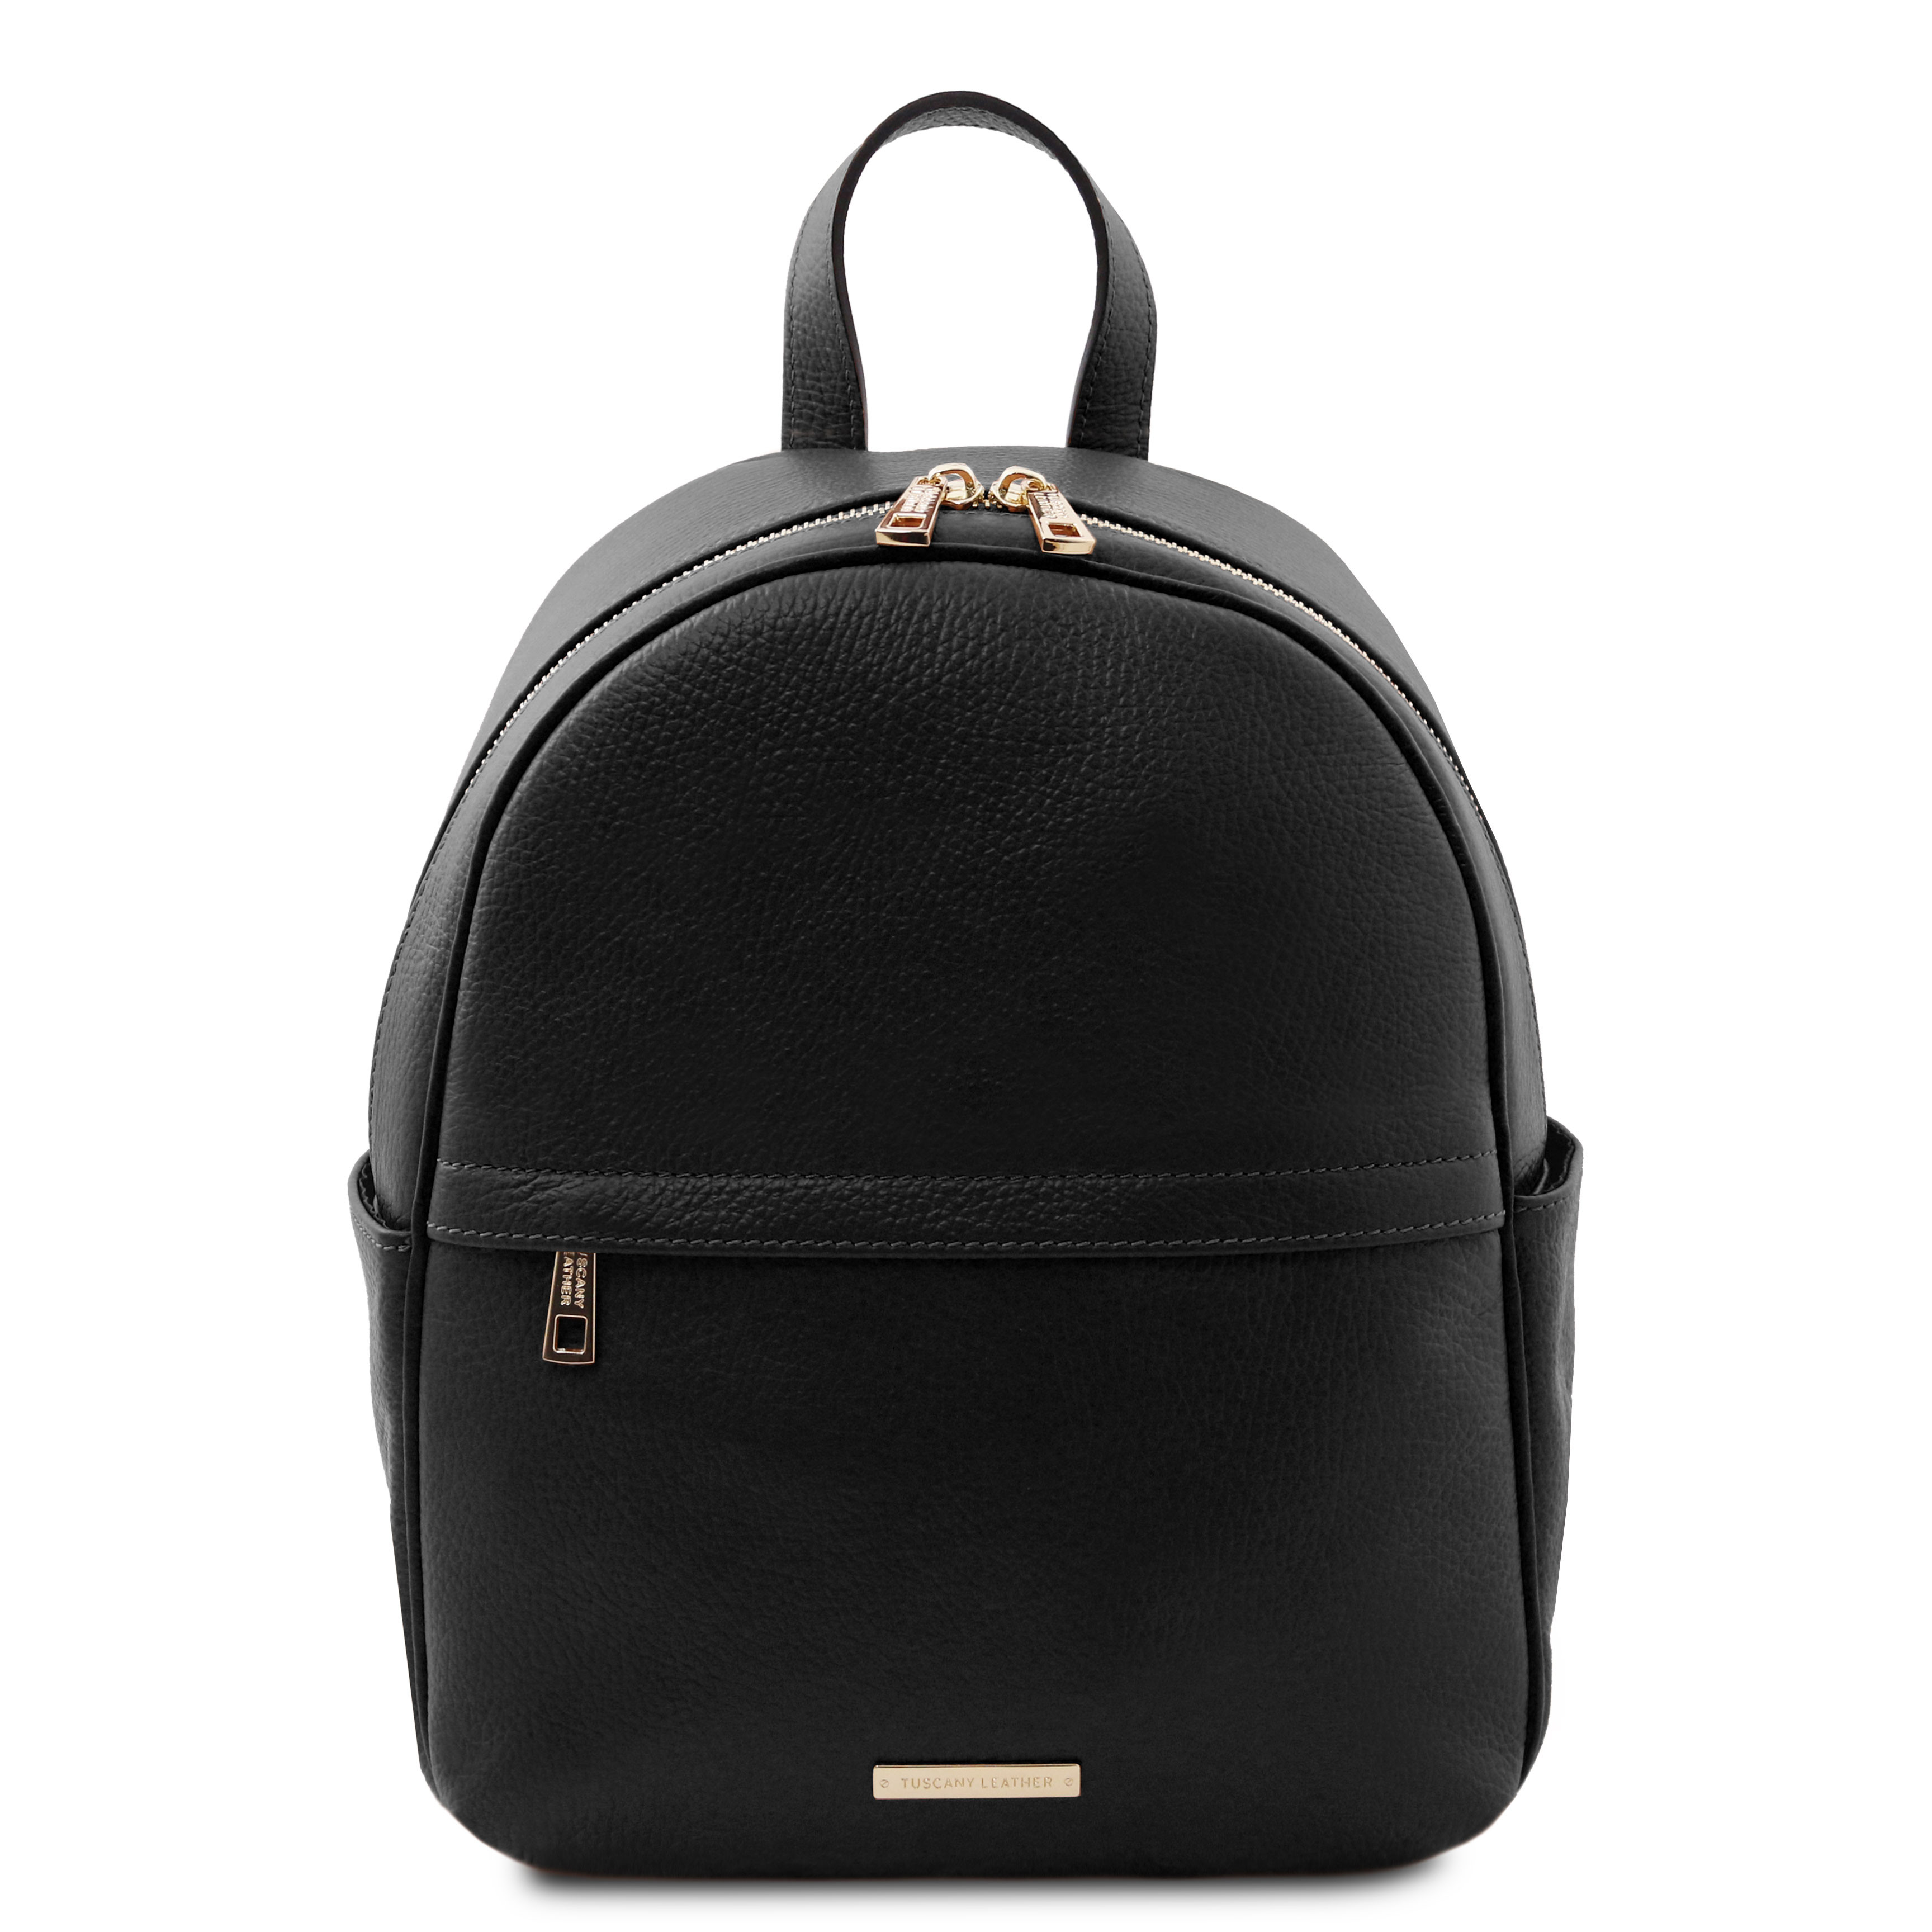 Womens Leather Backpack Black | House of Leather